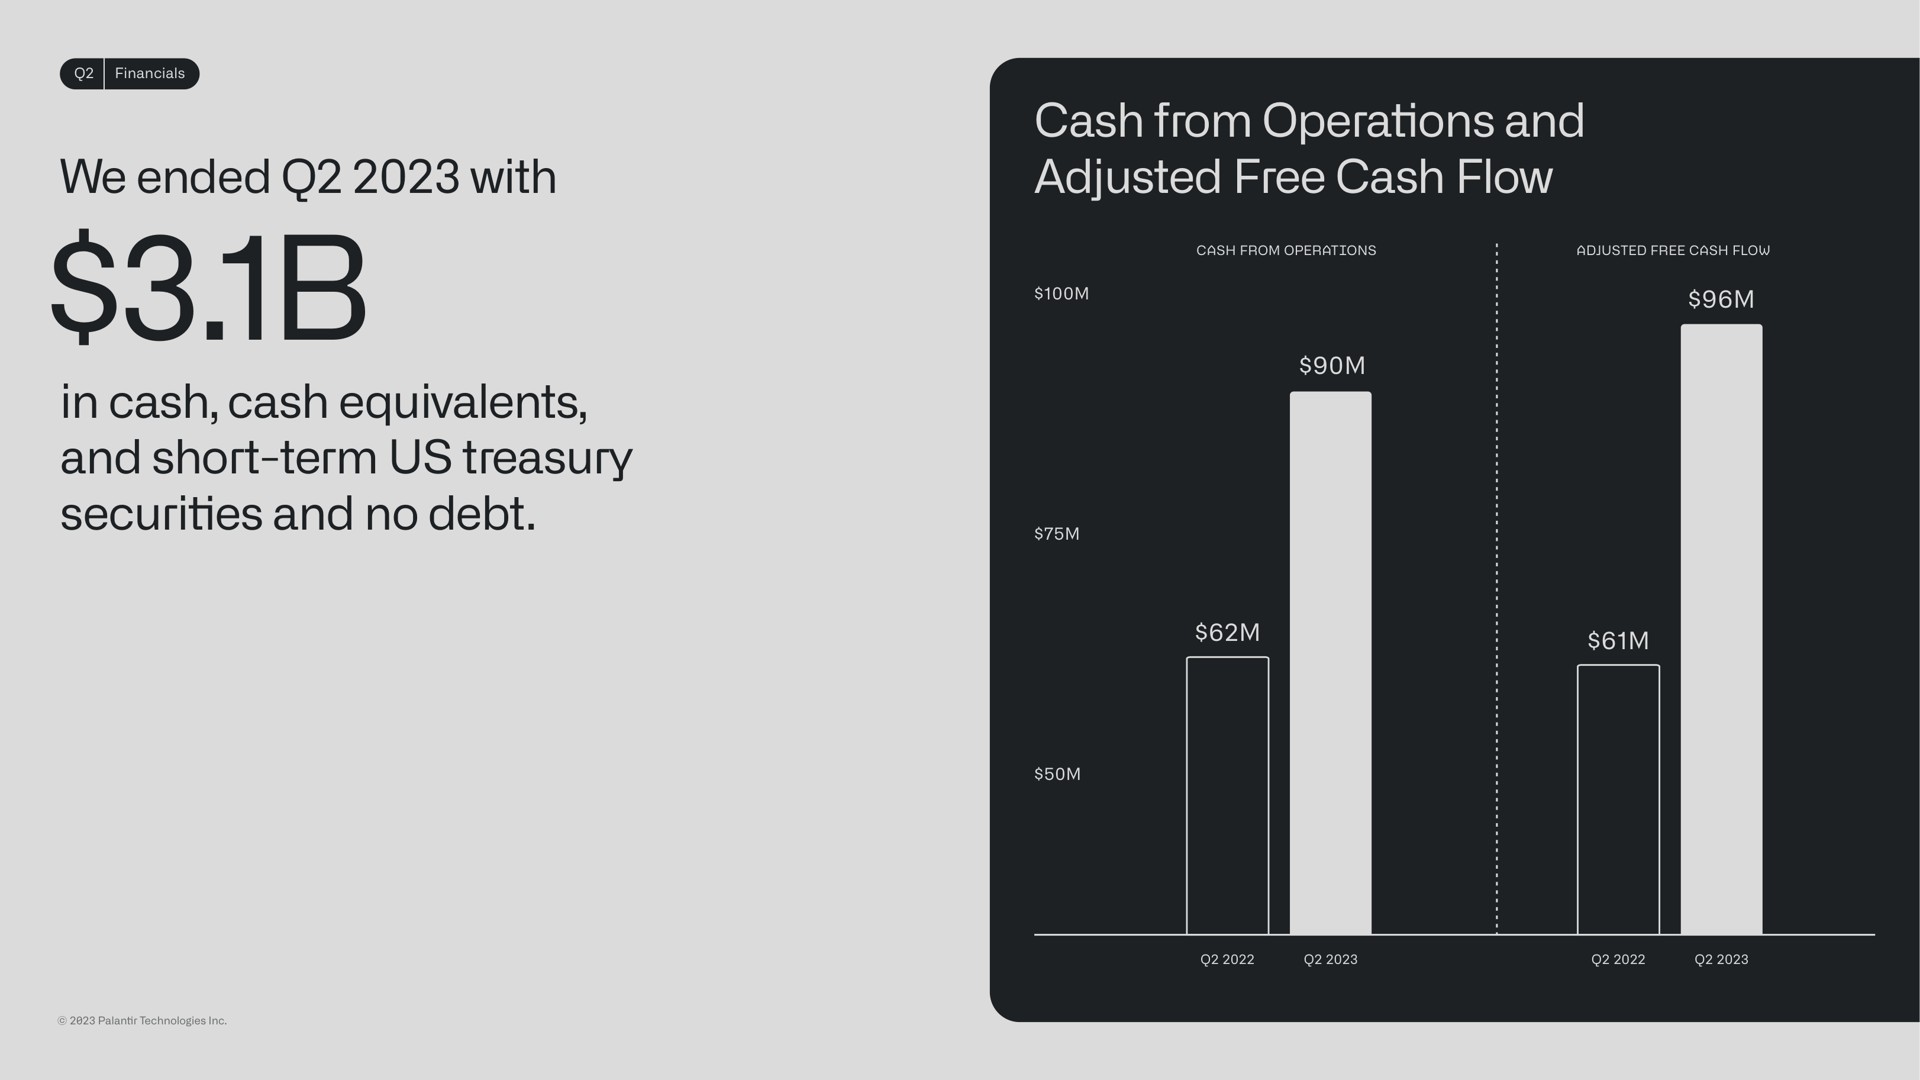 we ended with in cash cash equivalents and short term us treasury securities and no debt cash from operations and adjusted free cash flow | Palantir